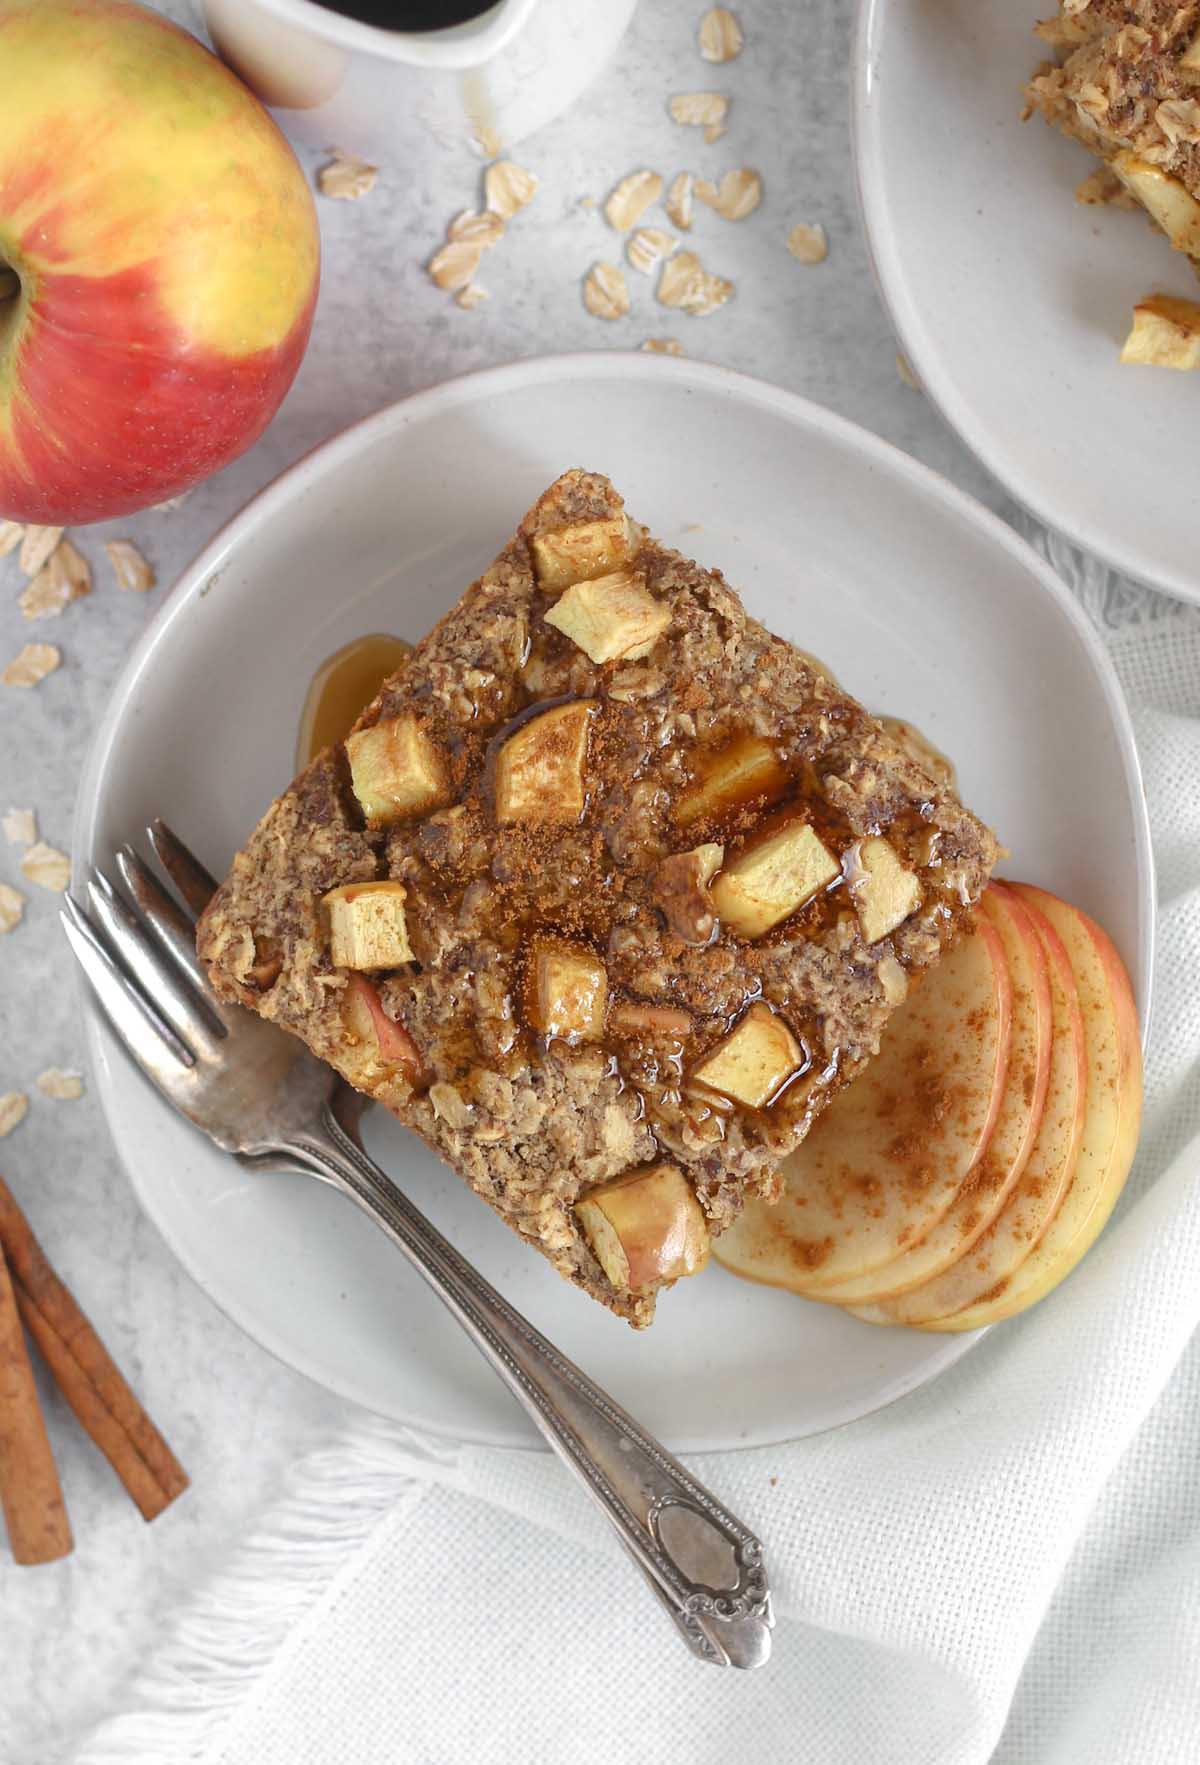 Square piece of apple cinnamon baked oatmeal topped maple syrup on a round plate with a vintage fork.